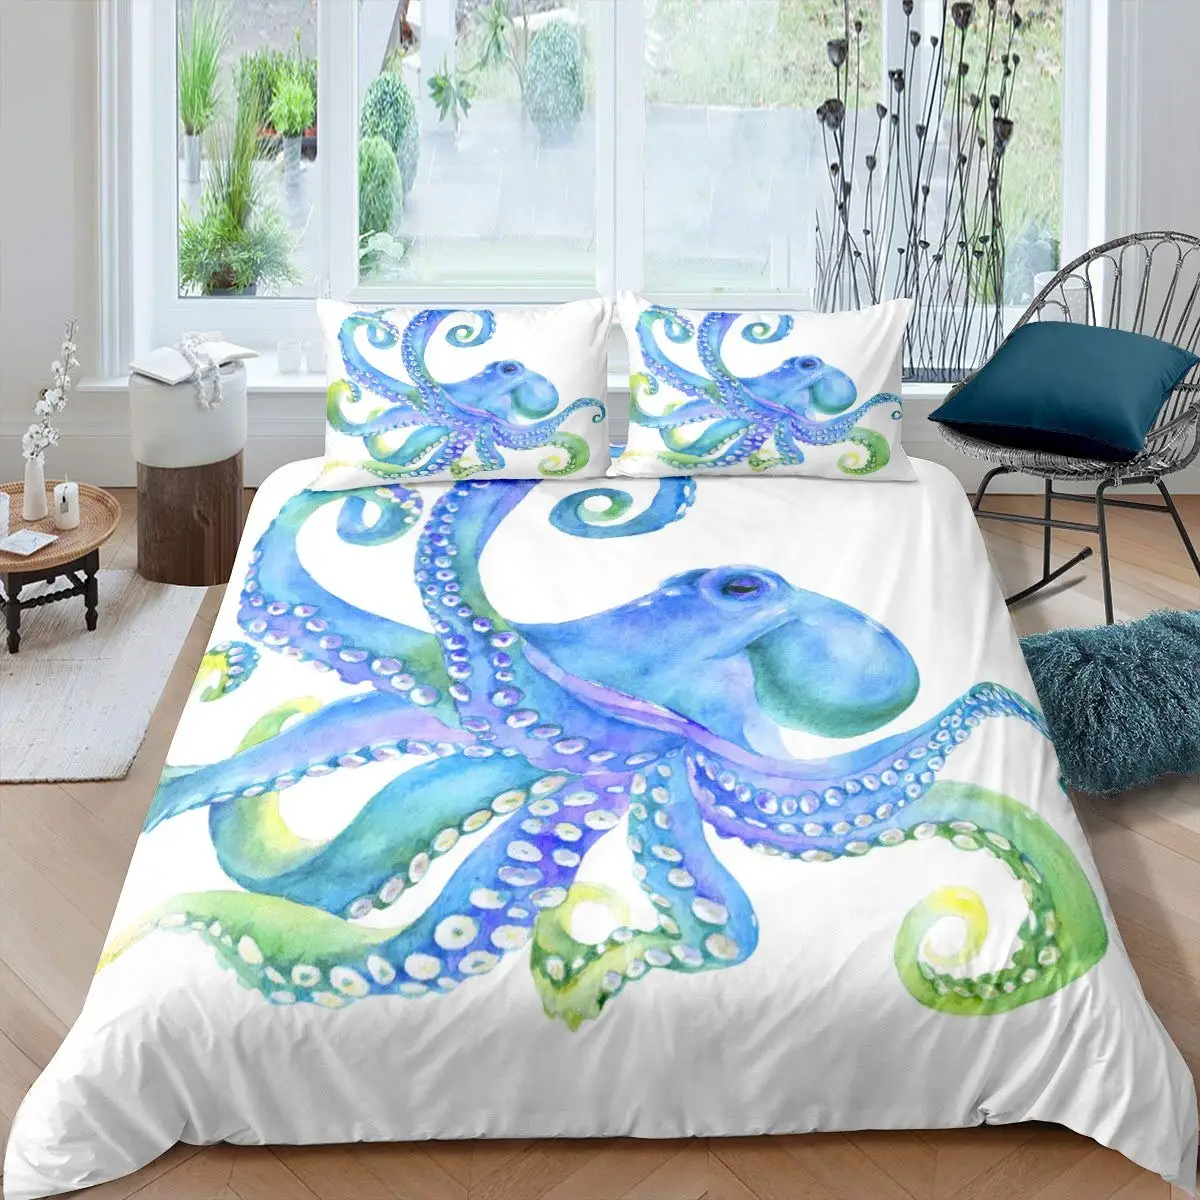 

Octopus Duvet Cover Set Teal Blue Octopus Tentacles Set Sealife Ocean Sea Animal Queen King Polyester Quilt Cover Twin Bedding